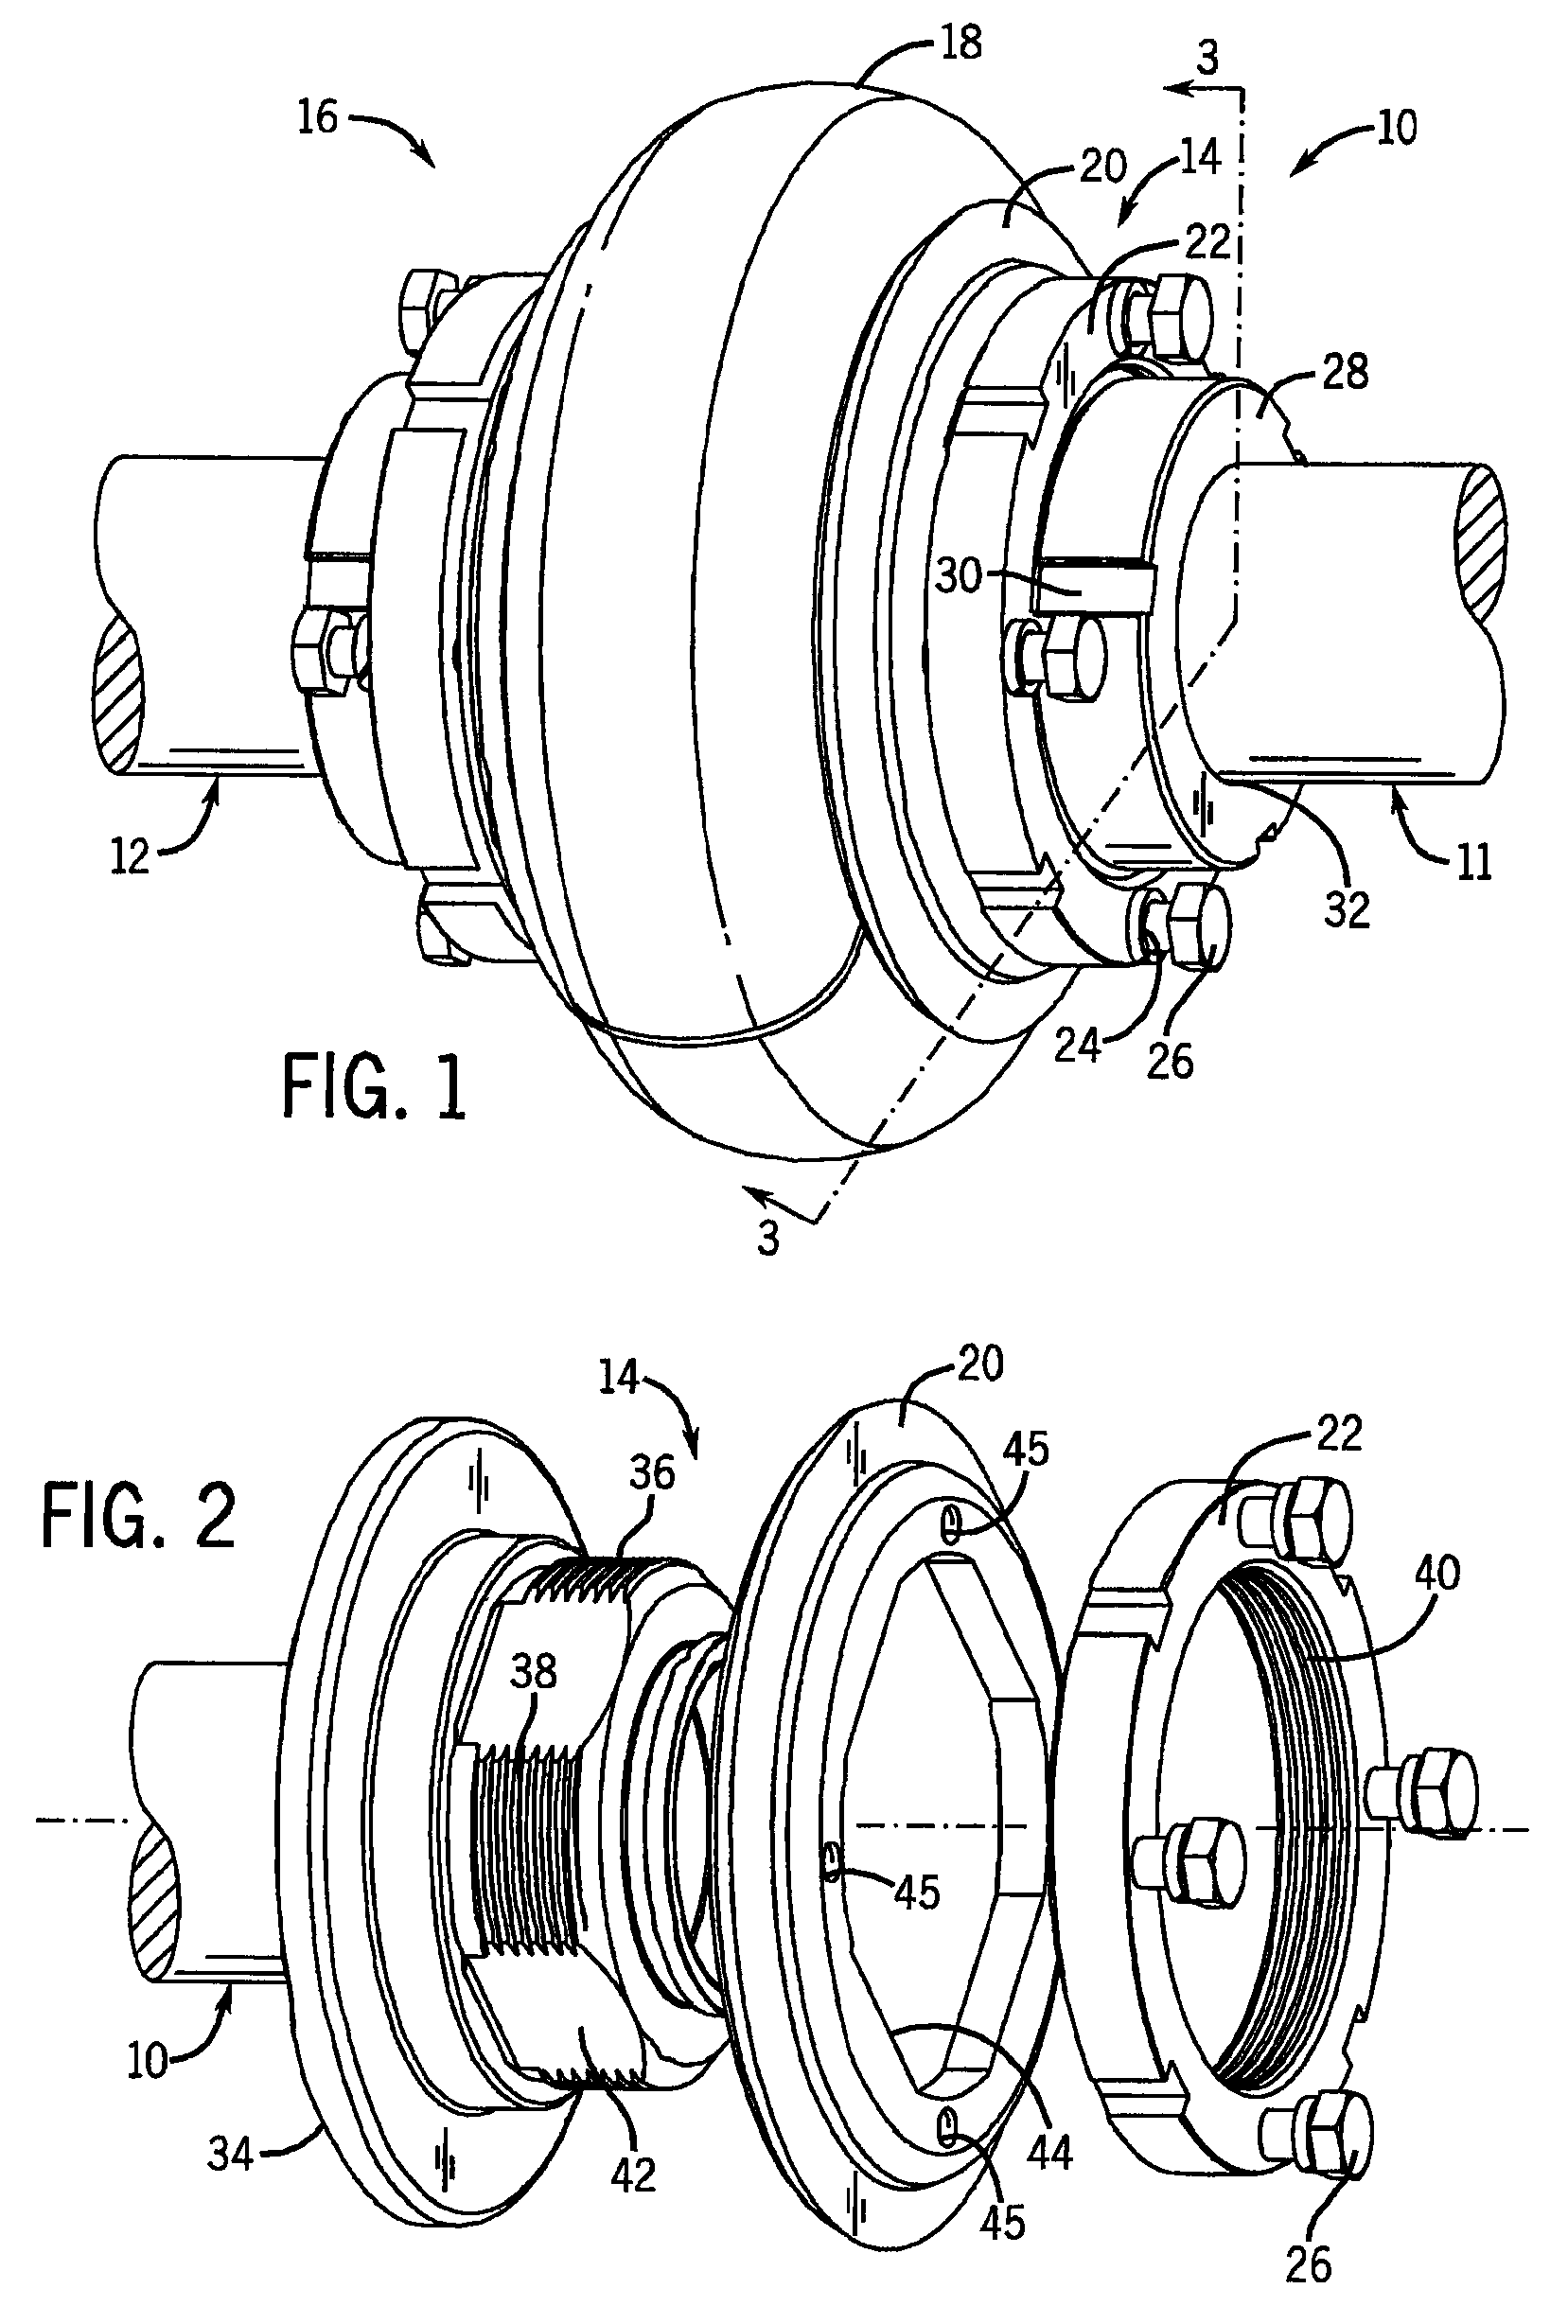 Flexible shaft coupling system with antirotational features